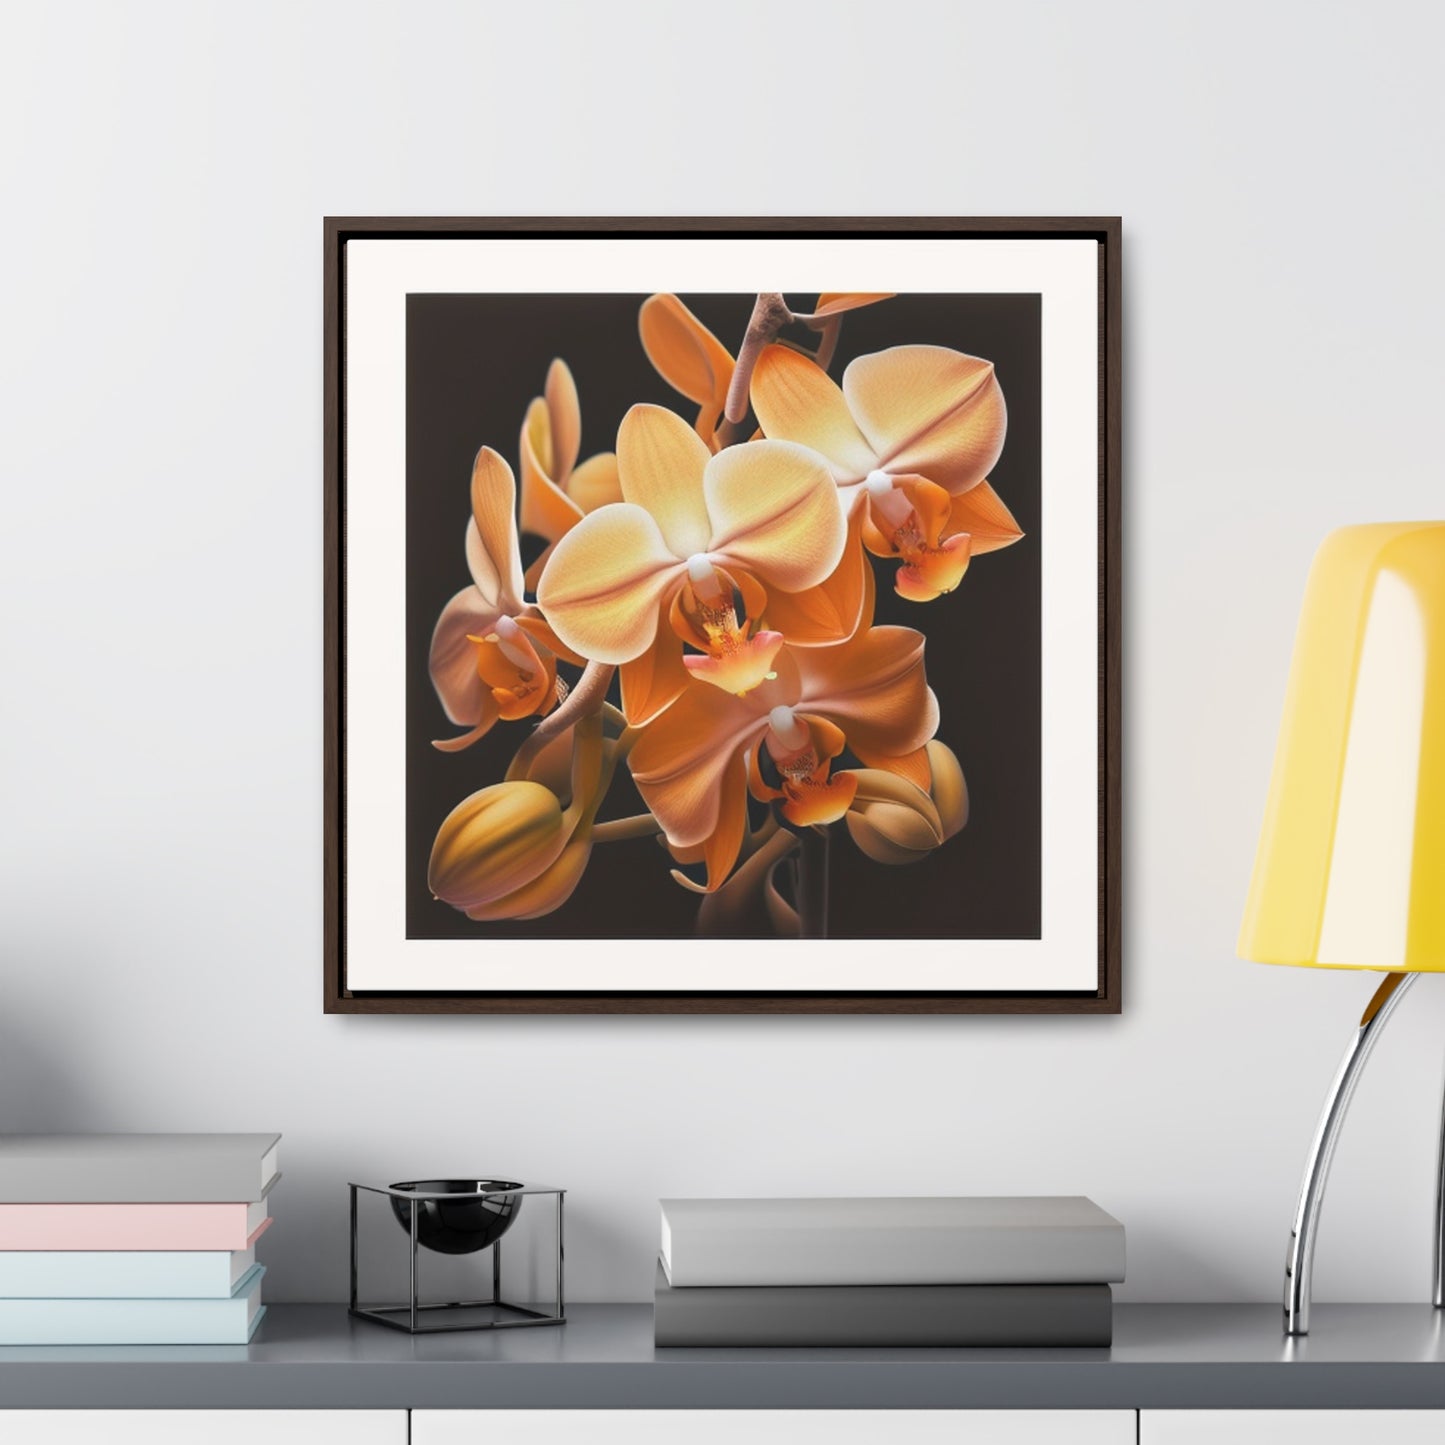 Gallery Canvas Wraps, Square Frame orchid pedals 1